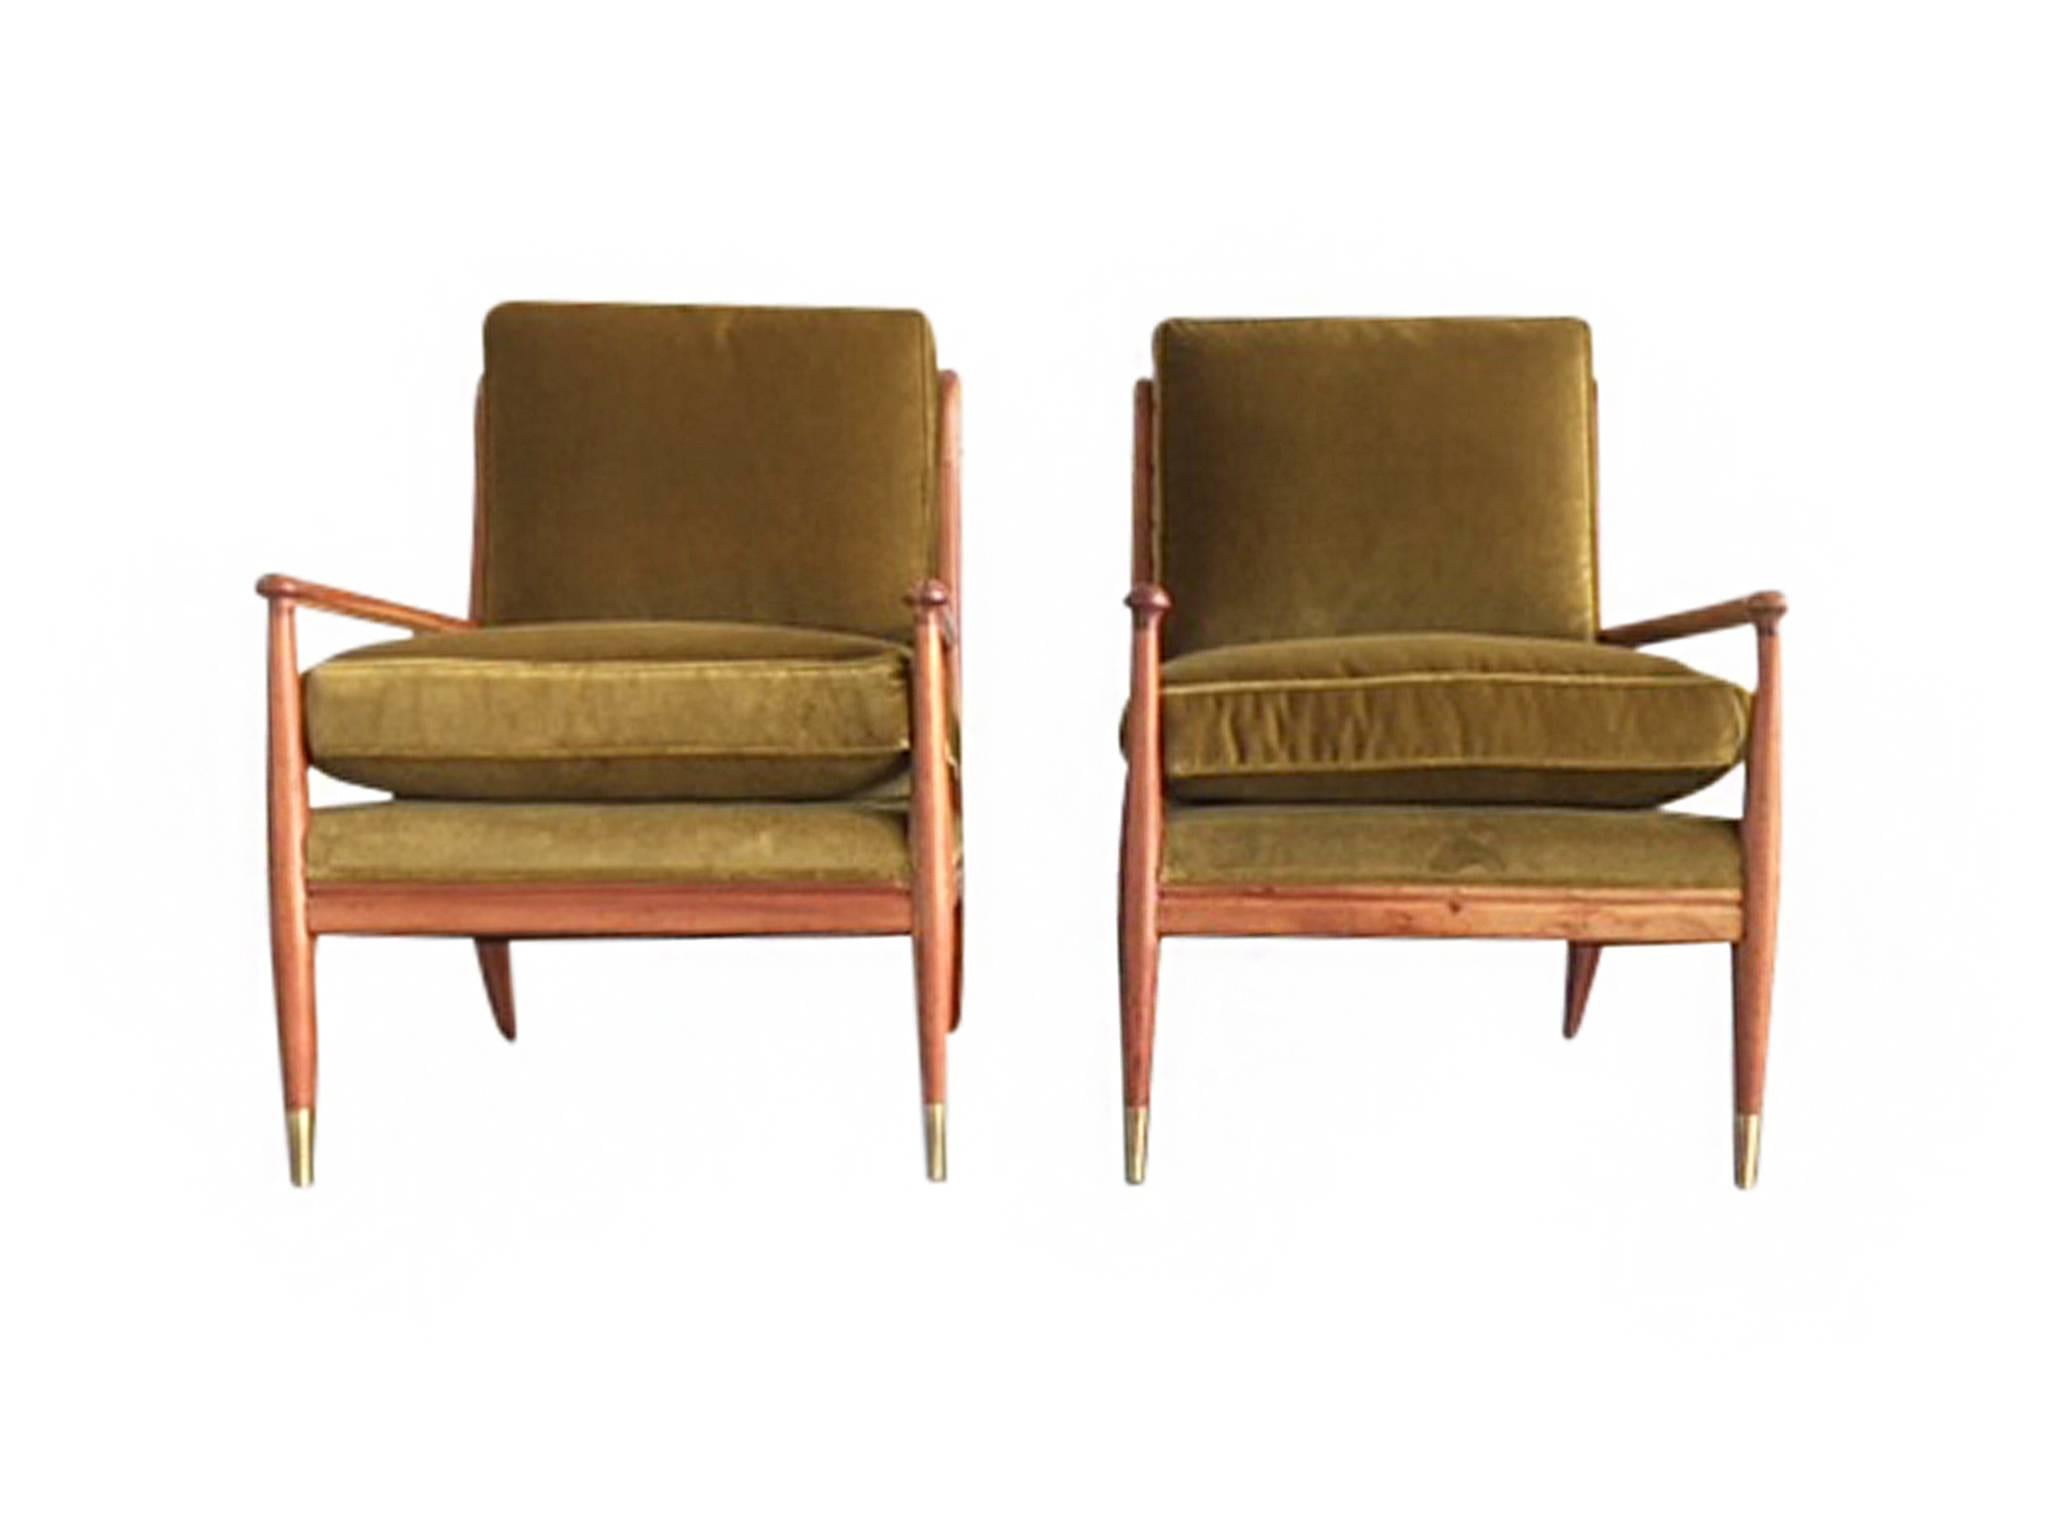 These comfortable Mid-20th Century lounge chairs were designed by John Stuart and manufactured by Widdicomb. They are exquisitely crafted from maple wood with a new, warm mahogany finish. Stuart's design is one of openness and clean lines that are